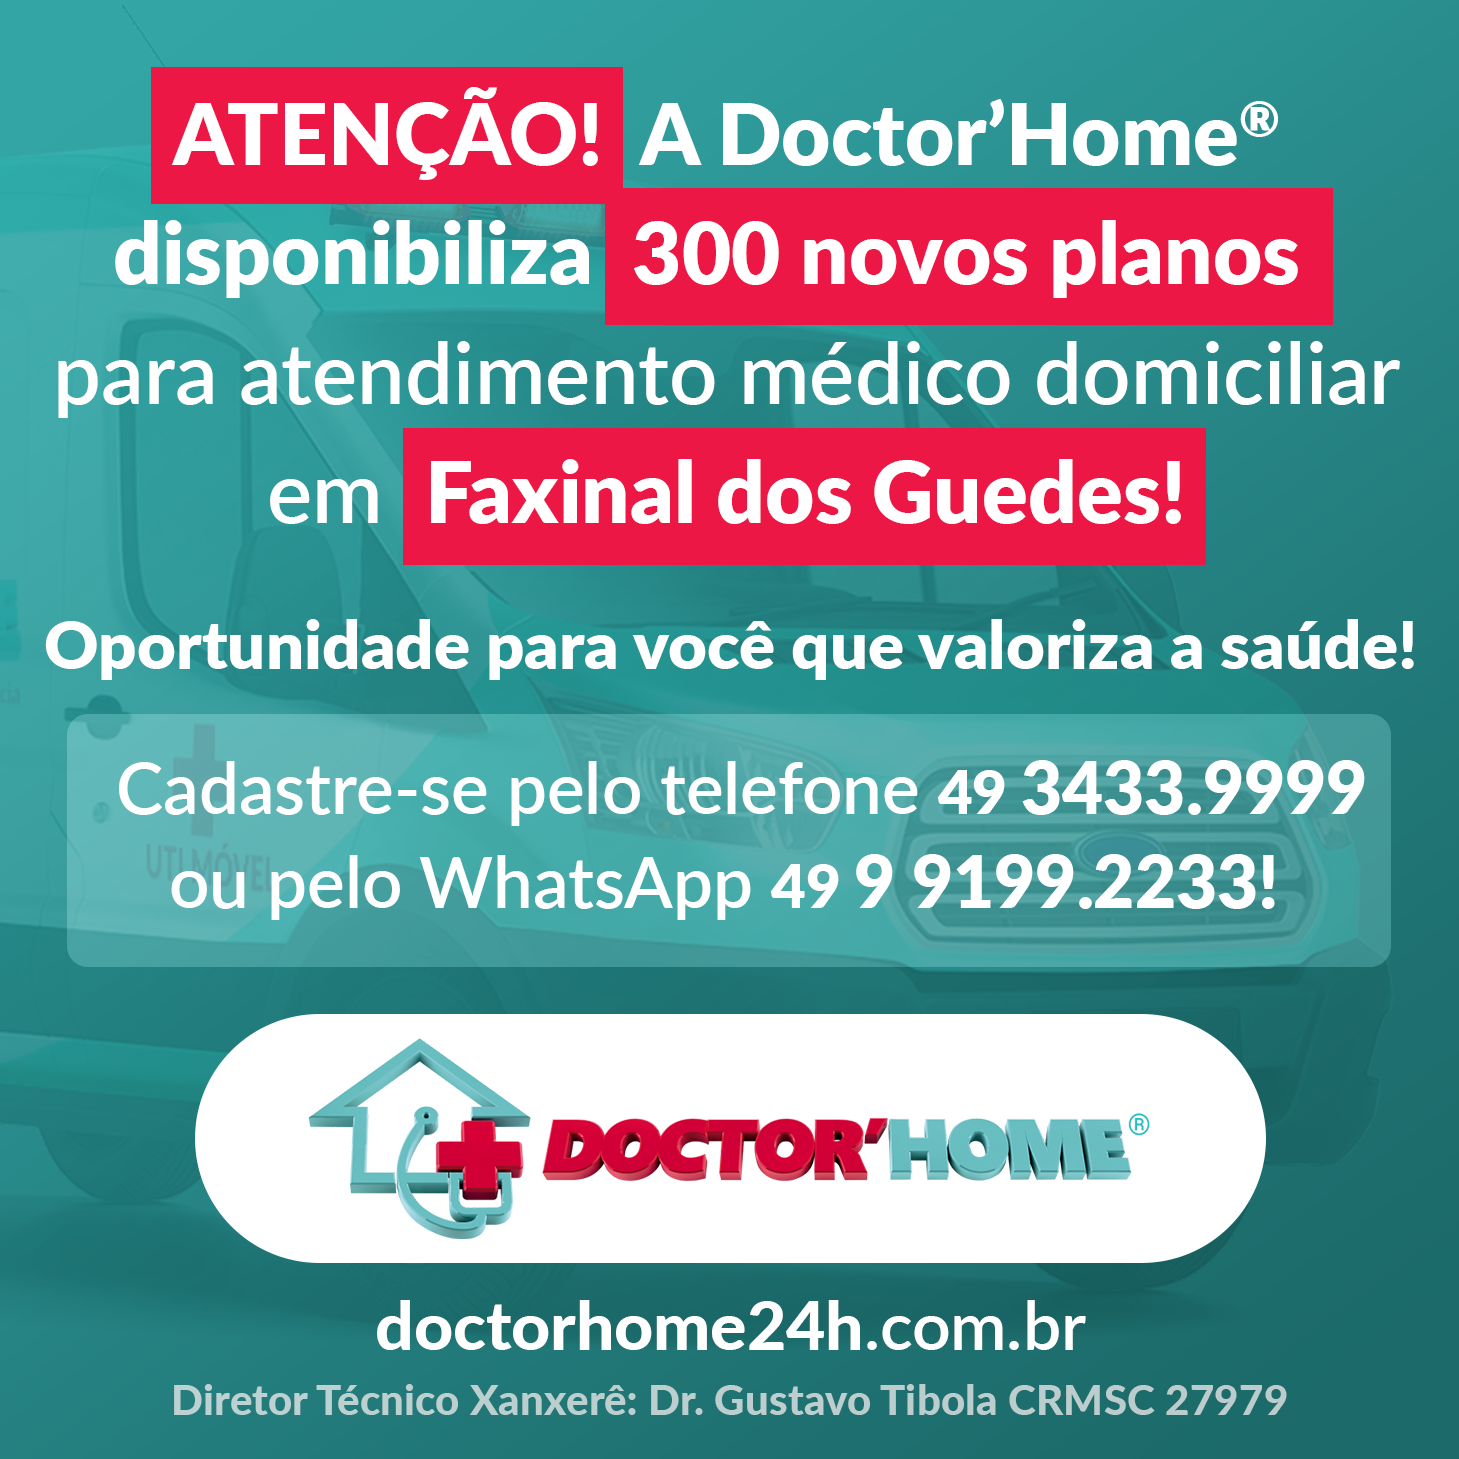 Doctor Home